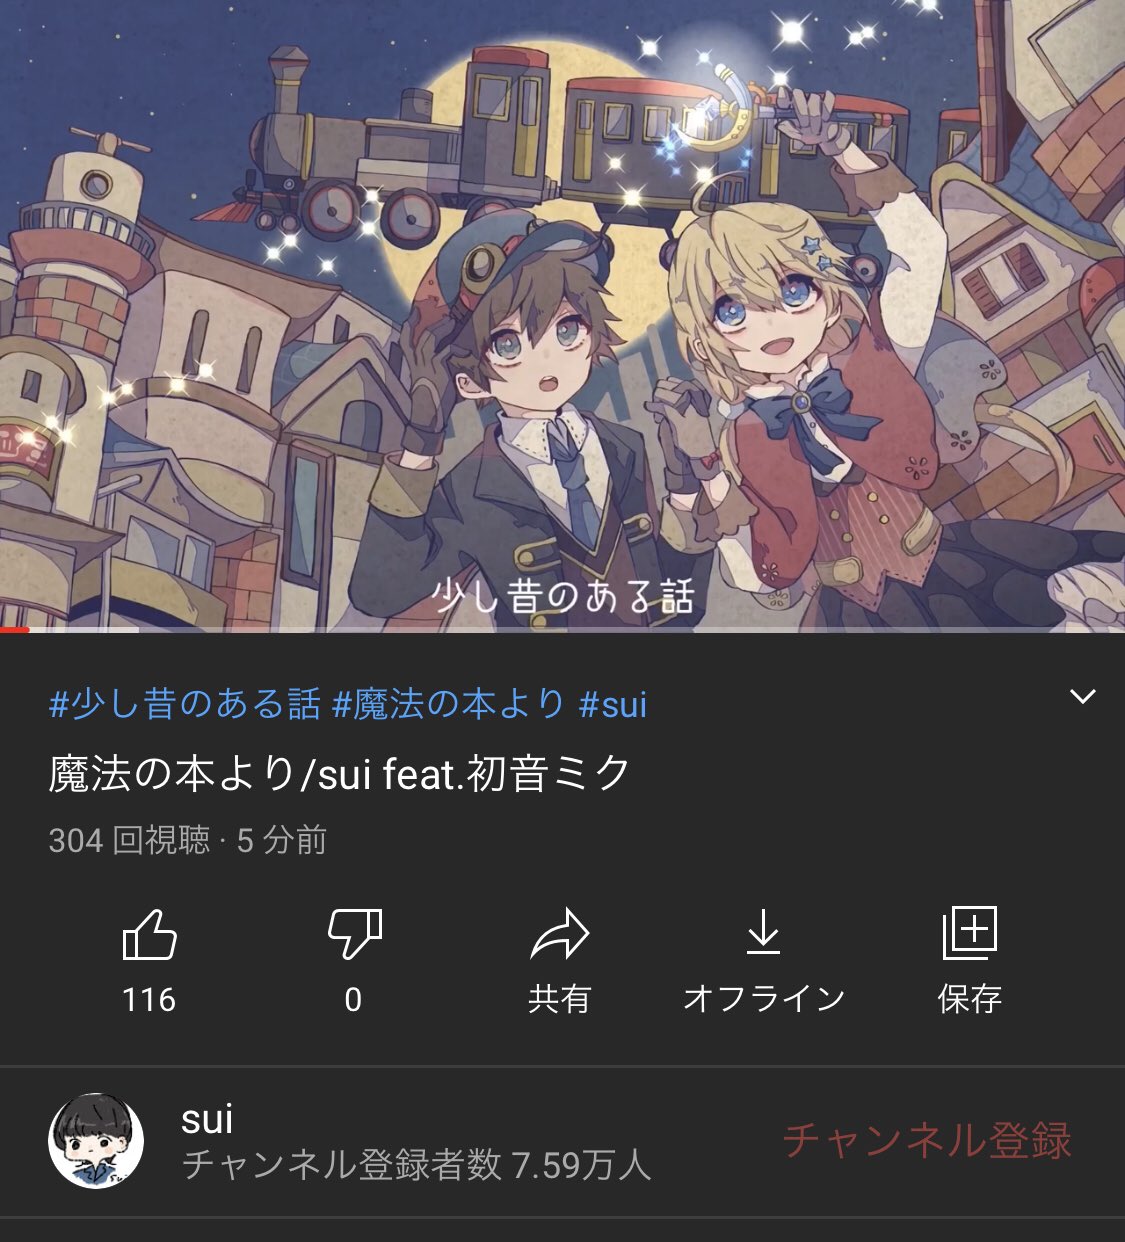 Sui Youtubeにも投稿しました 魔法の本より Sui Feat 初音ミク T Co X5ts8srdus Youtubeより T Co Czntli7hlx Twitter